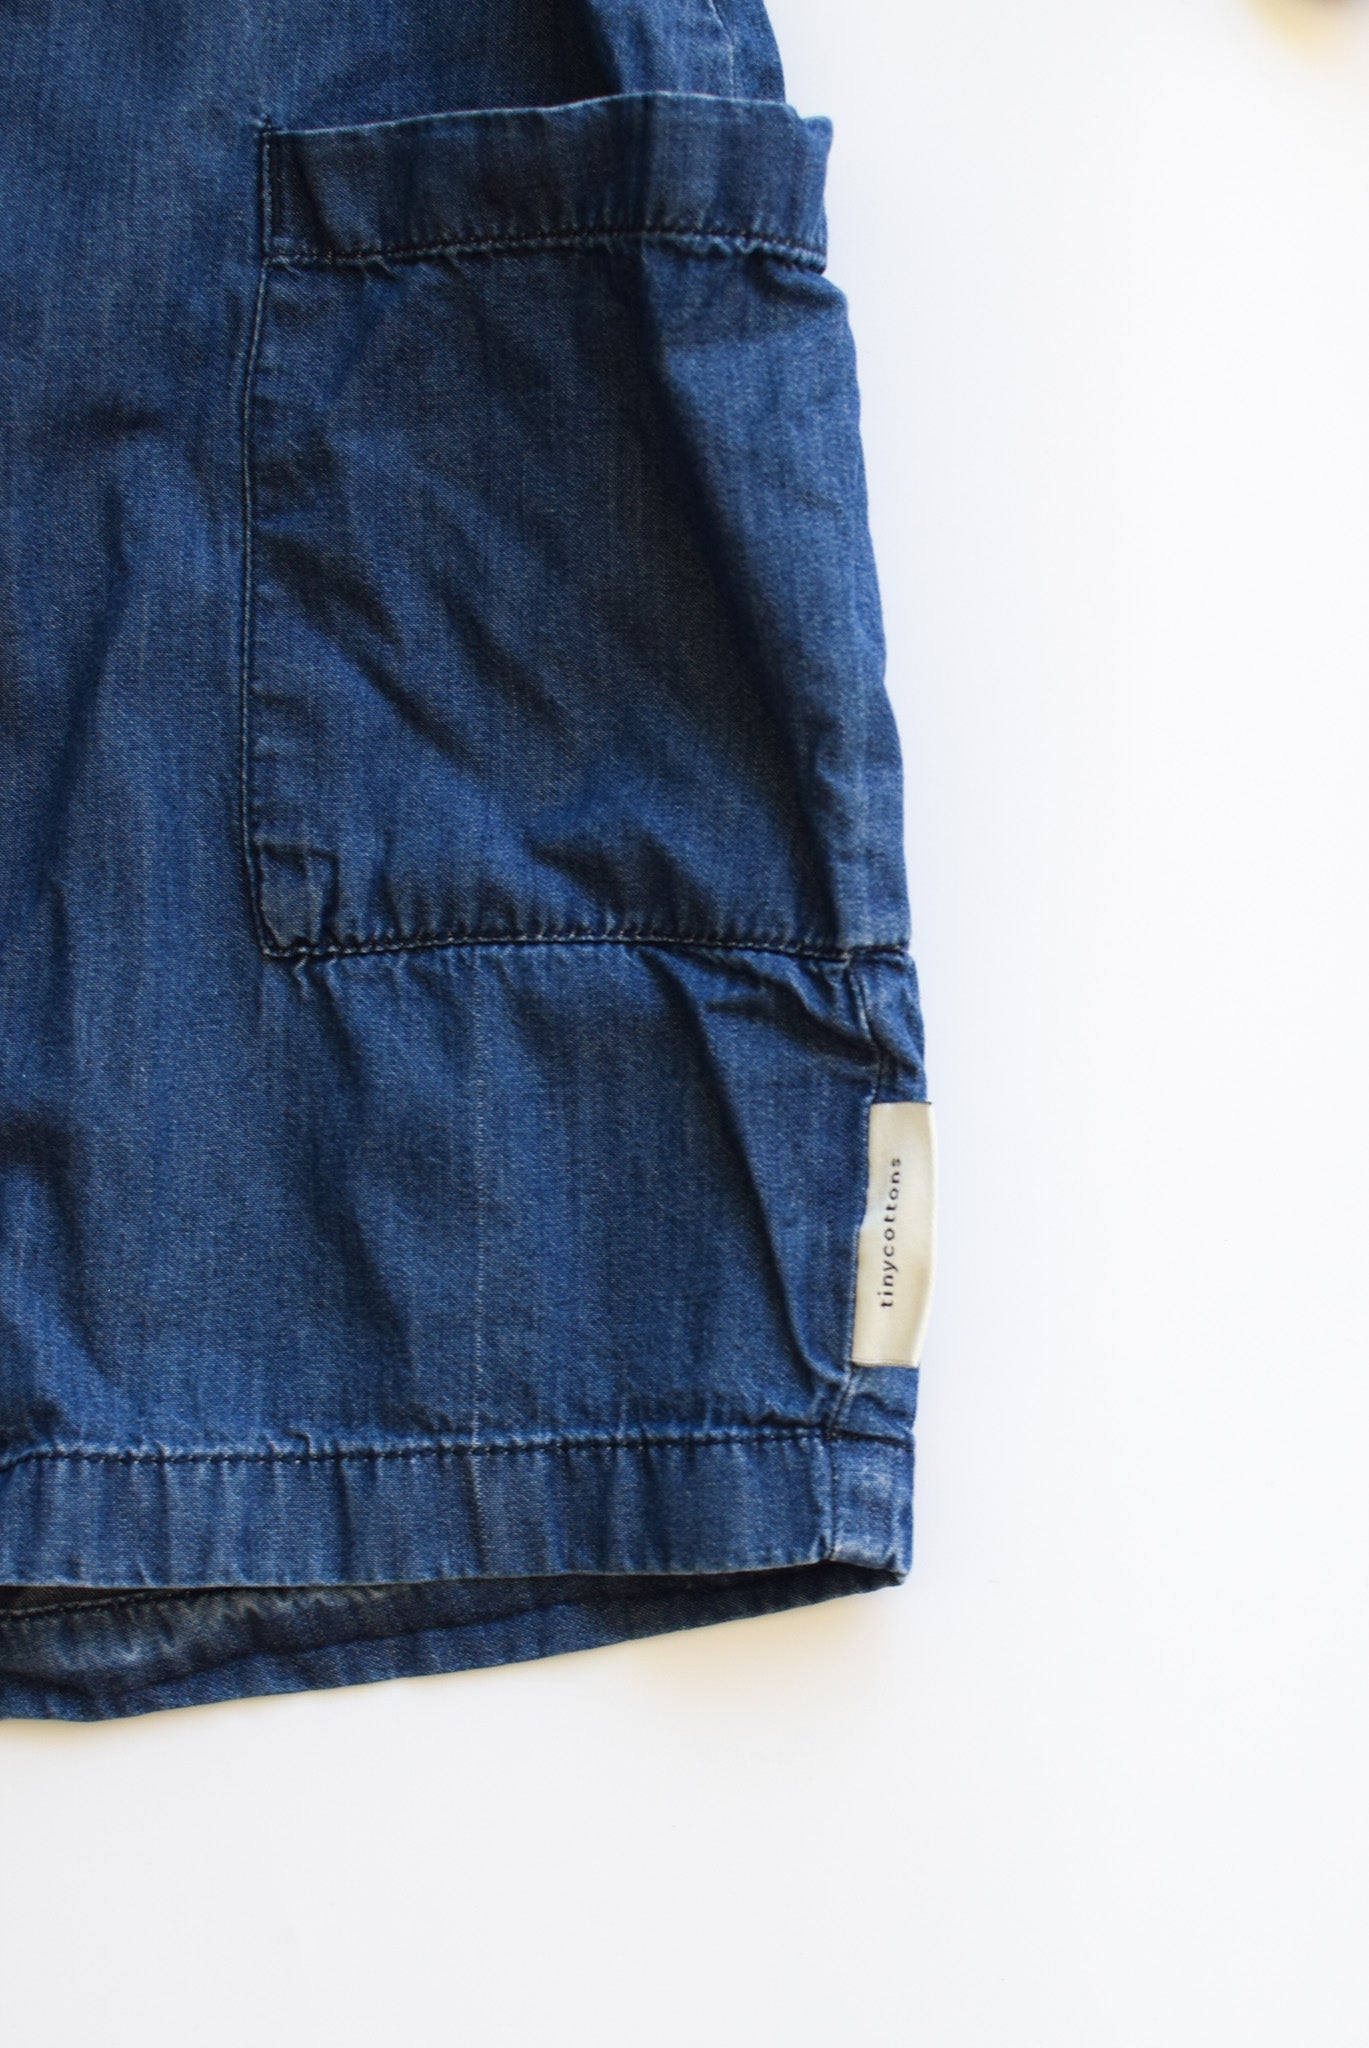 PRE-OWNED Jeanskleid Tinycottons Gr. 12-18M